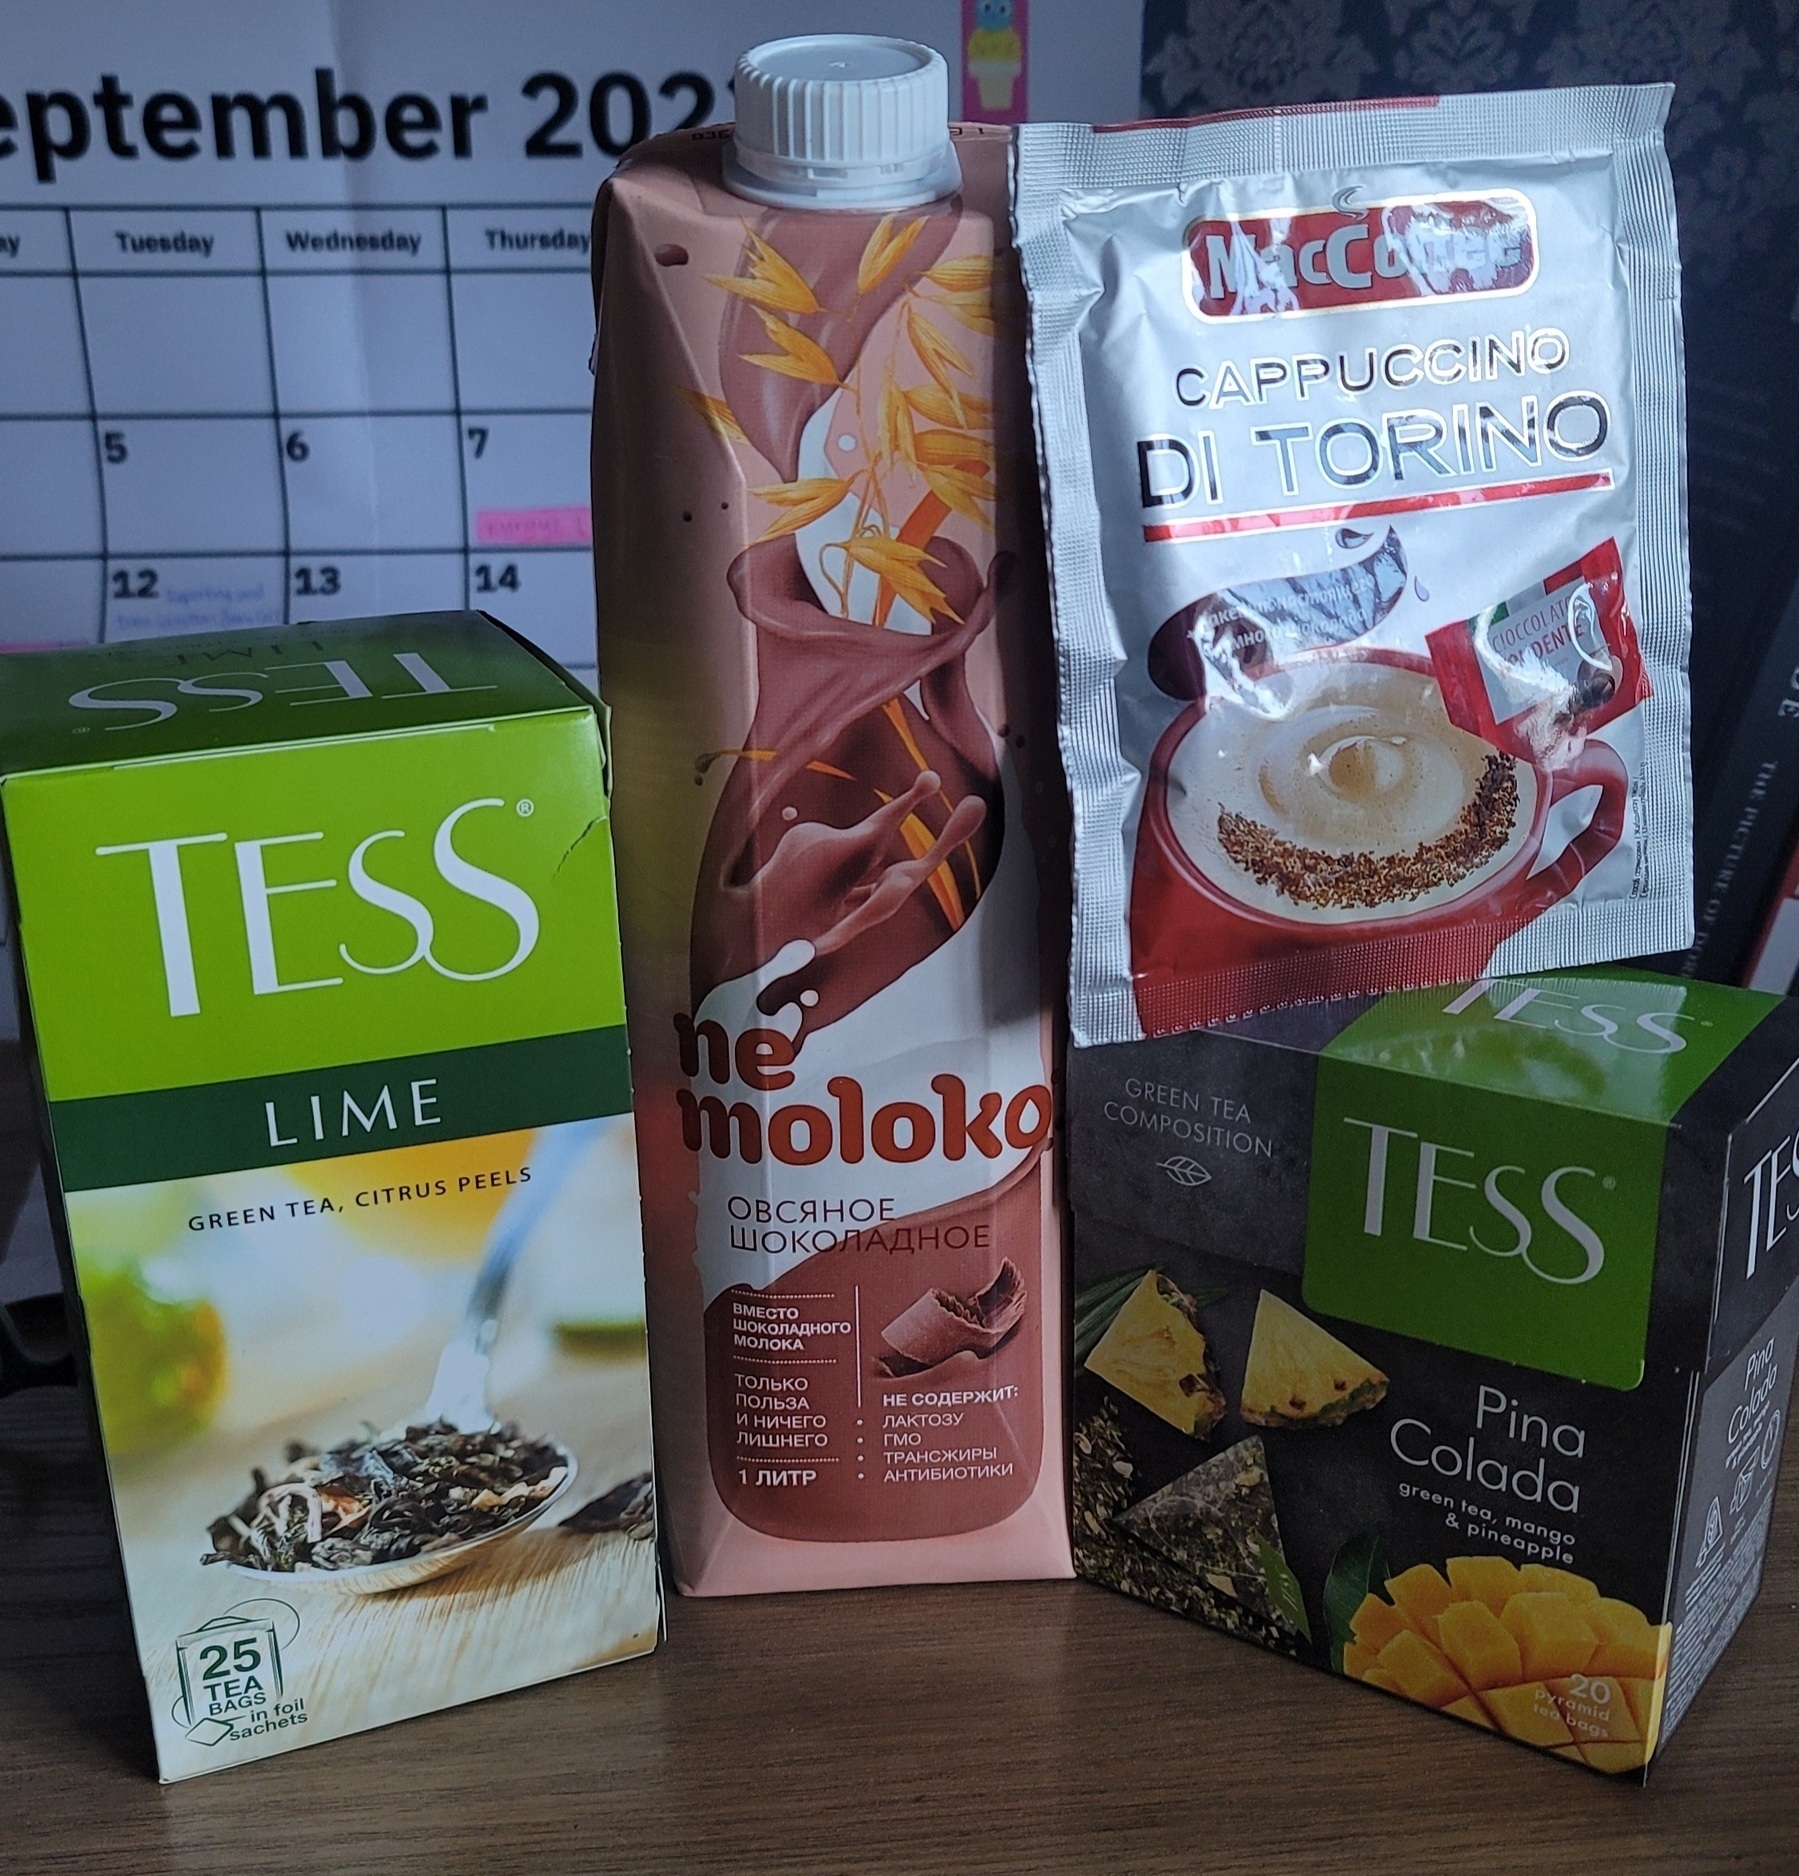 two boxes of Tess green tea; 1 liter Nemoloko carton of lactose free chocolate milk; and a MacCoffee instant cappuccino packet